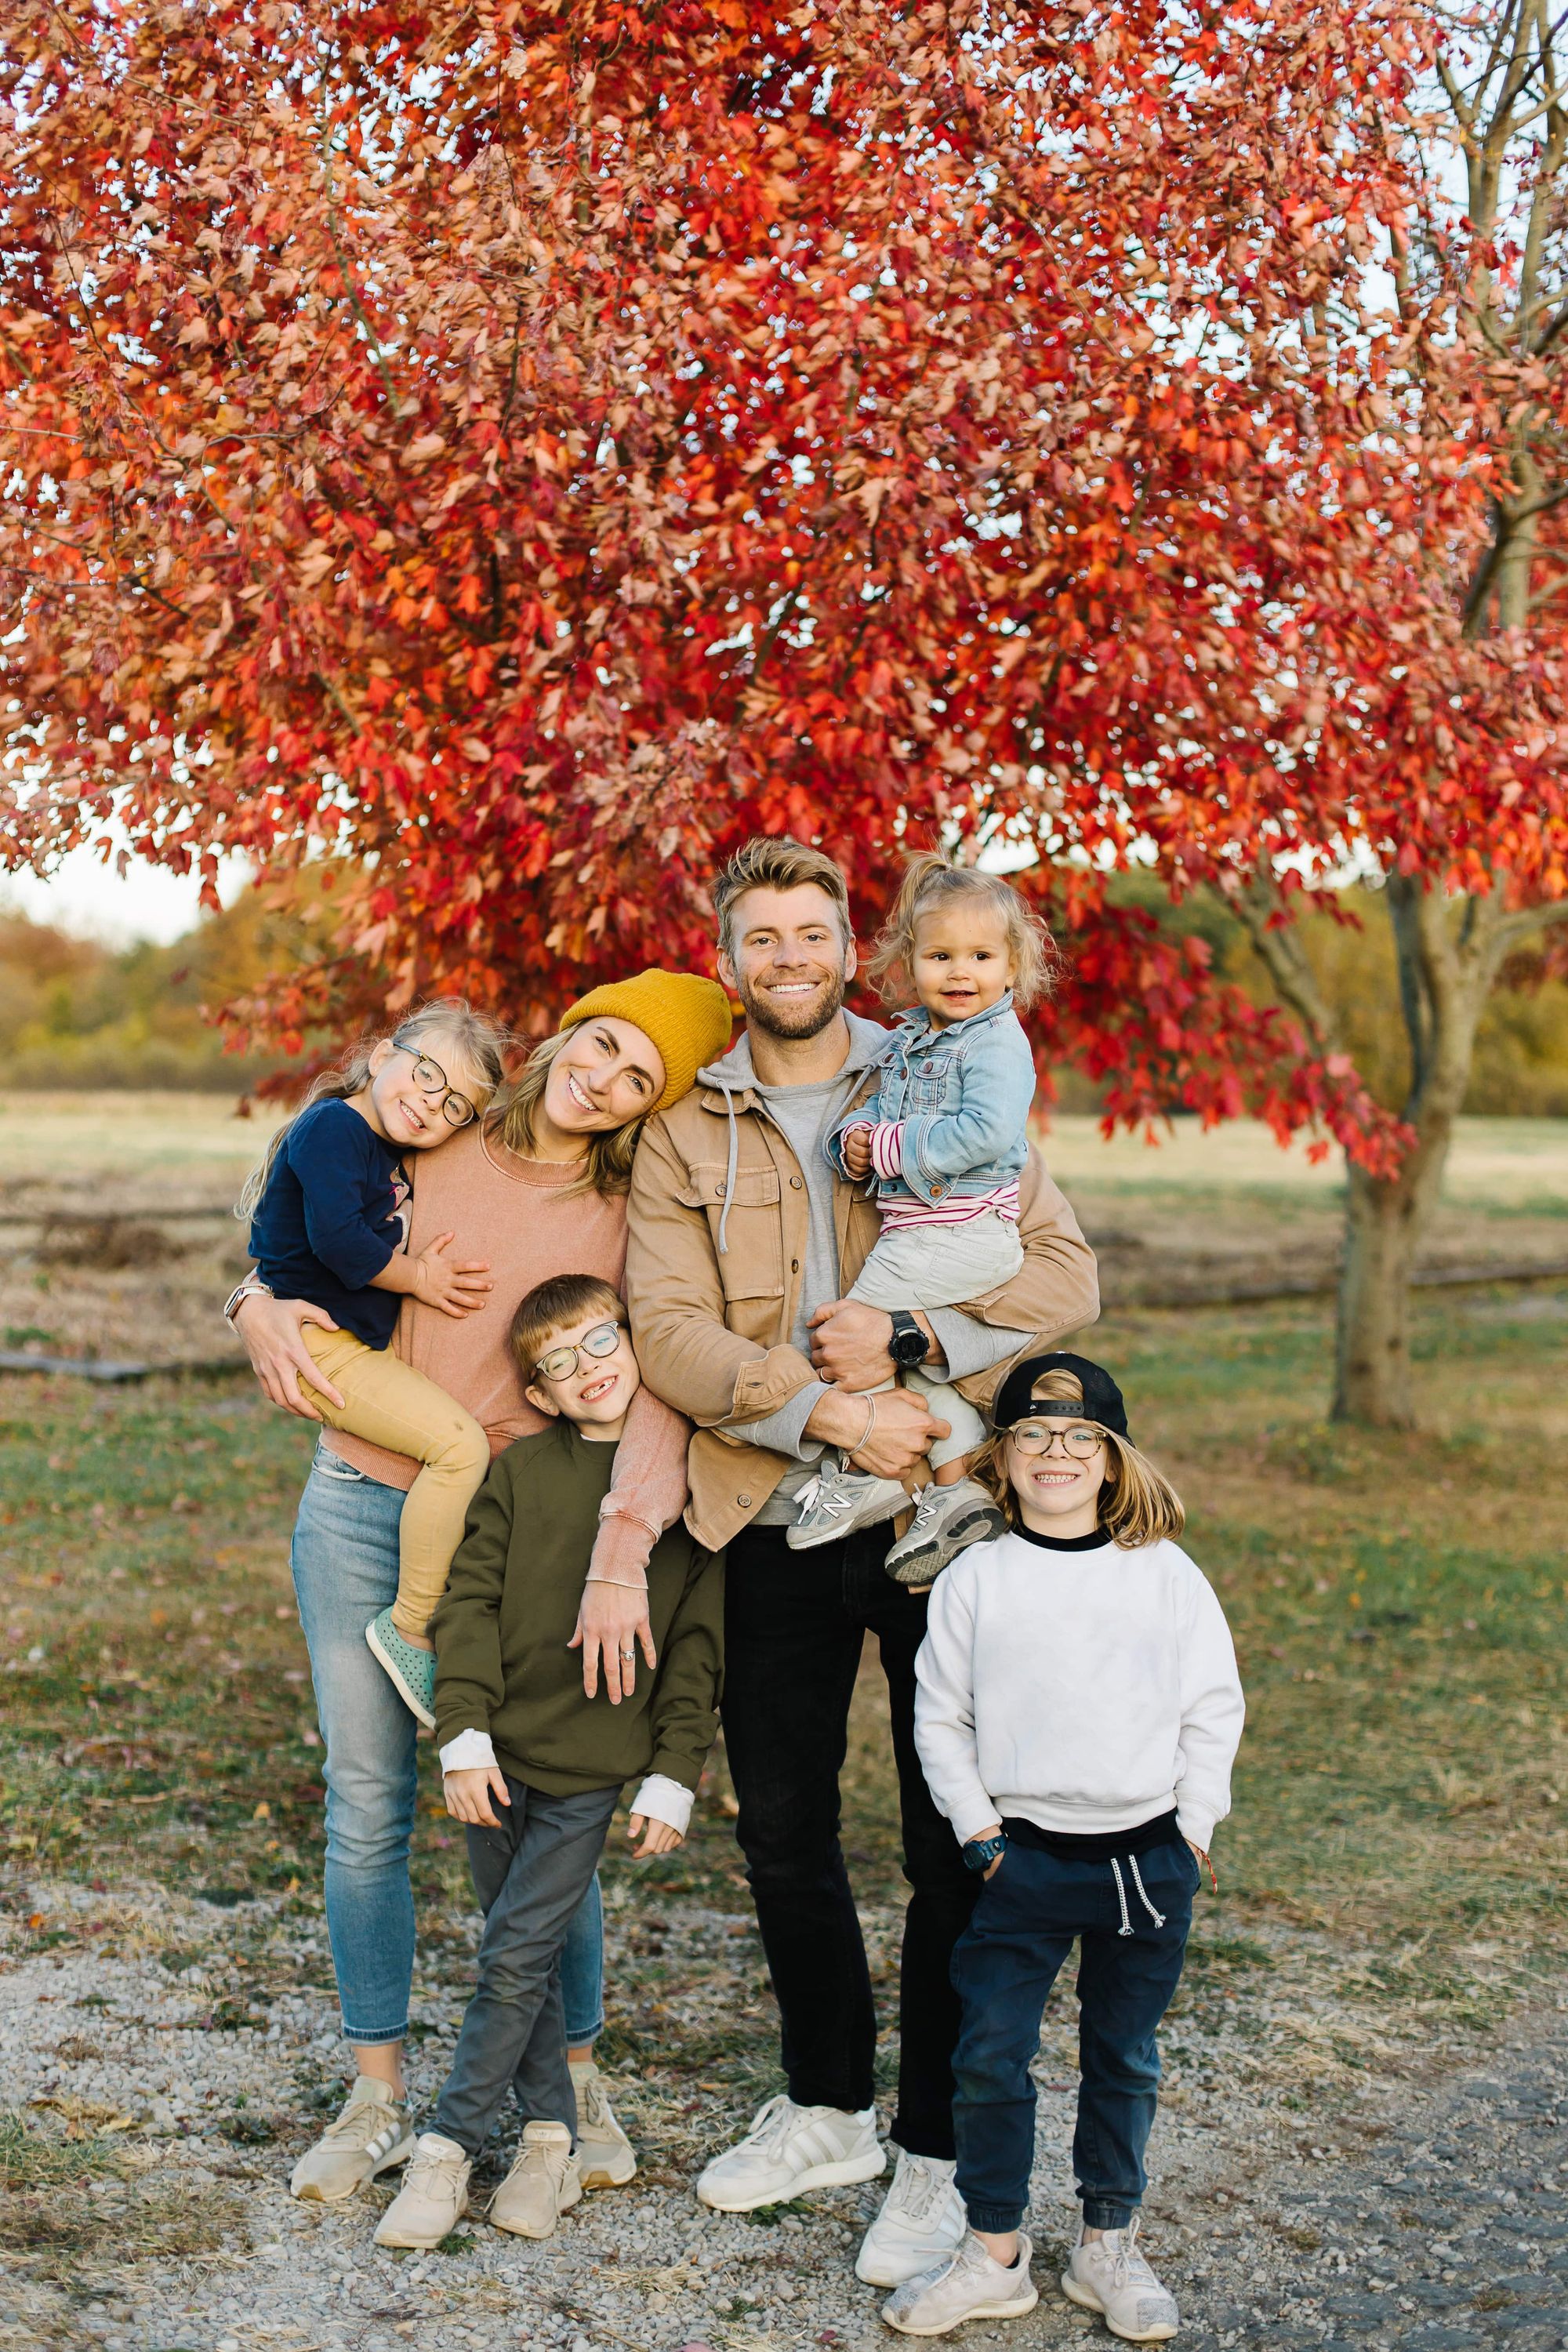 Yeah Baby Goods owners Katie and Brent Kruithof and their four children